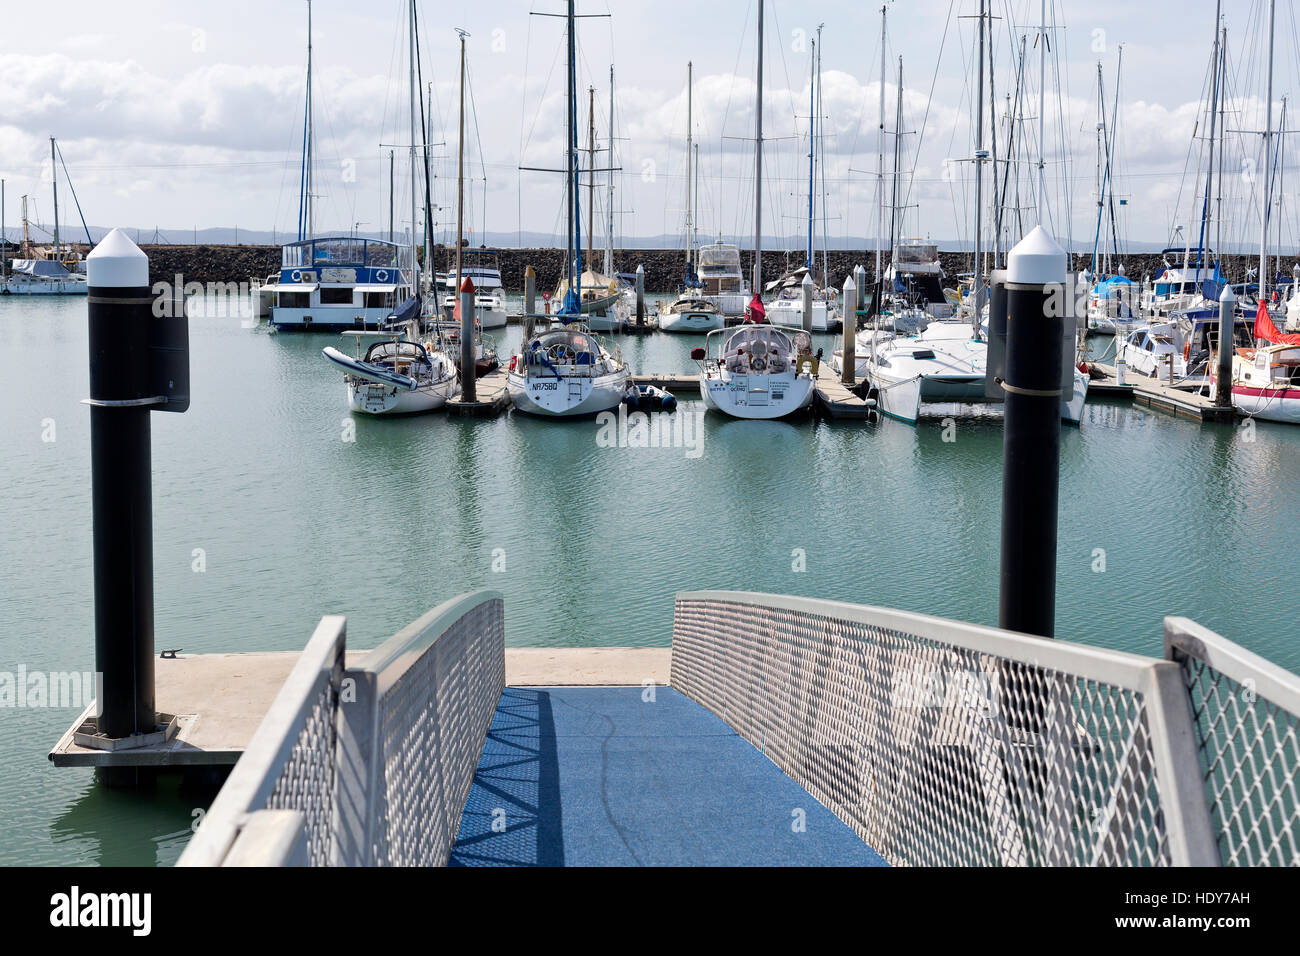 View of the Great Sandy Straits Marina, located on the Northern end of Urangan harbour in Hervey Bay, Australia Stock Photo